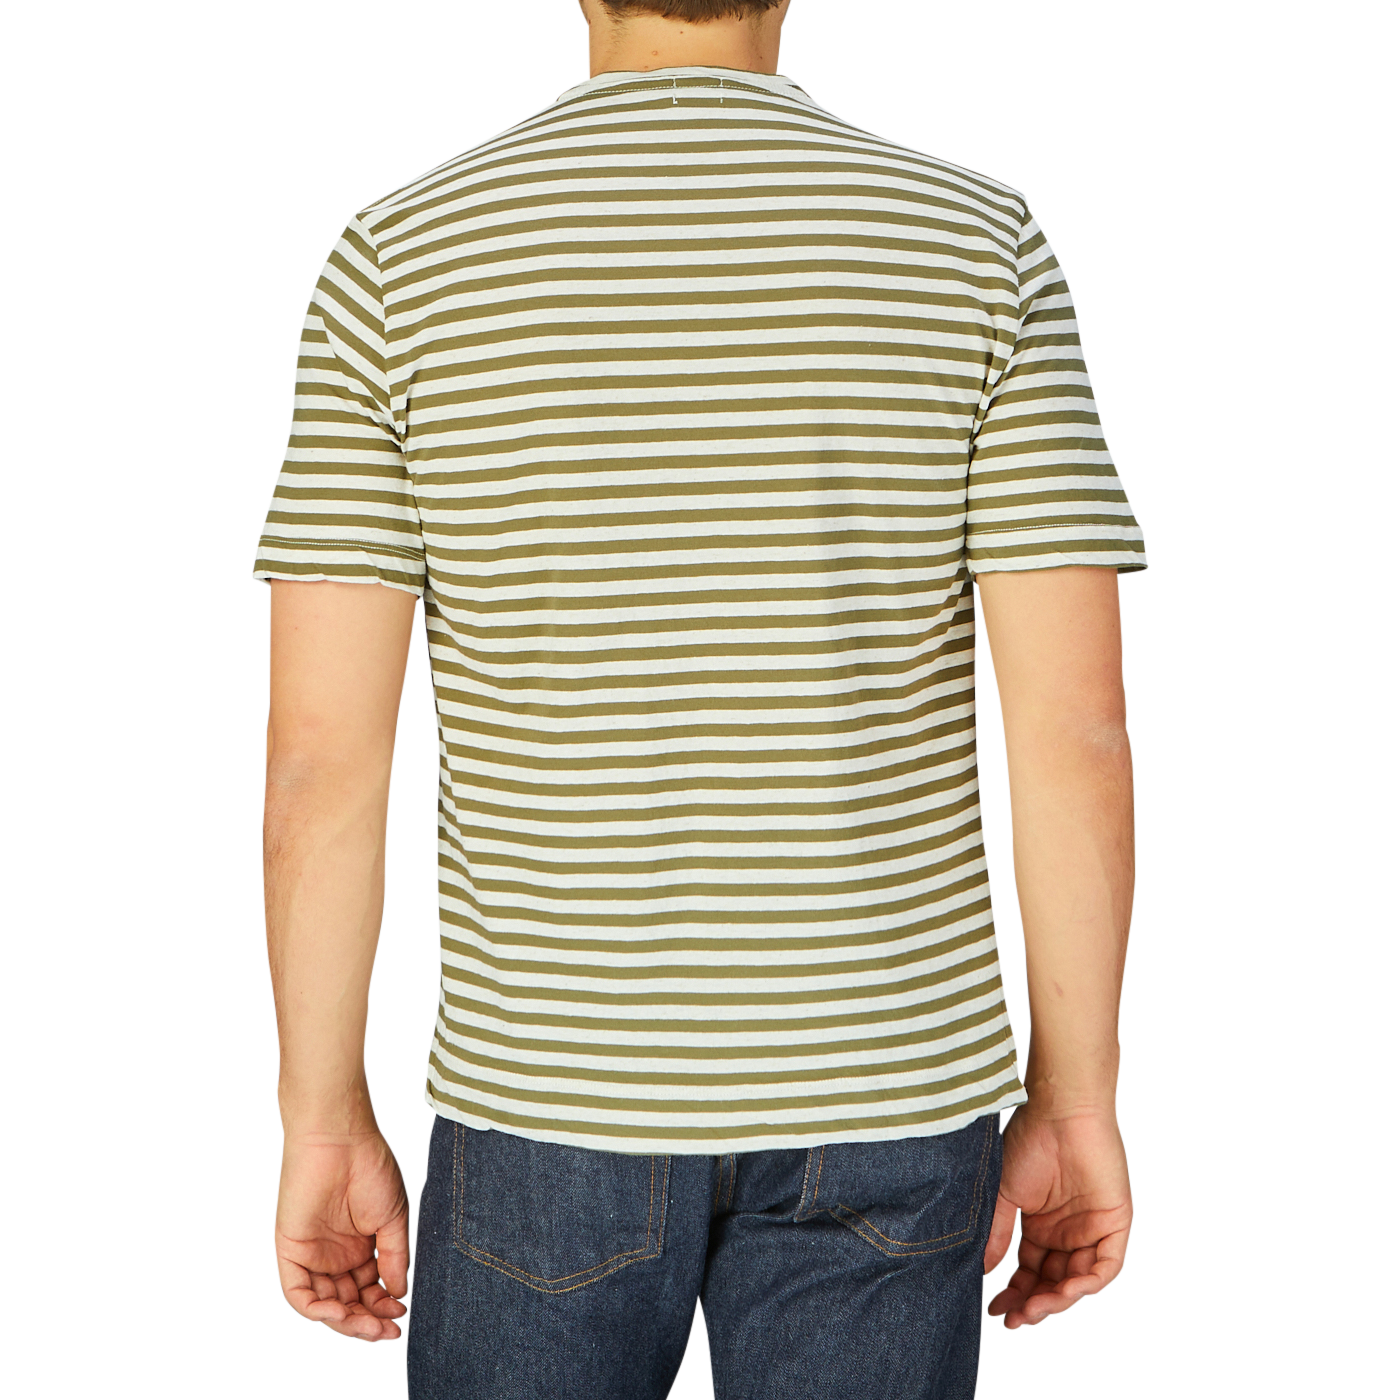 A person from behind wearing a Massimo Alba Olive Green Striped Cotton Linen T-Shirt and blue jeans.